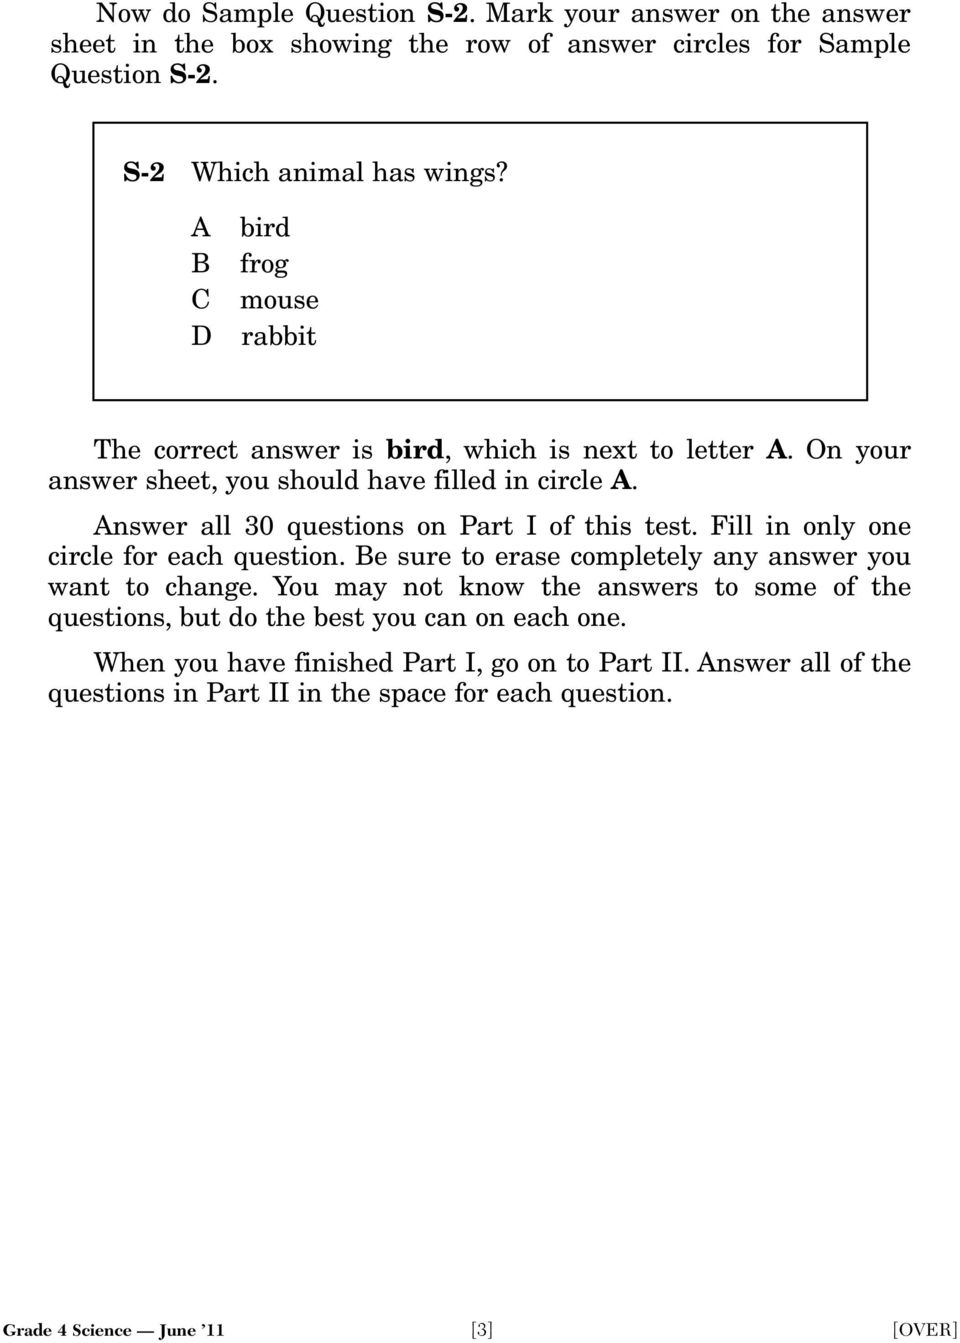 Answer all 30 questions on Part I of this test. Fill in only one circle for each question. Be sure to erase completely any answer you want to change.